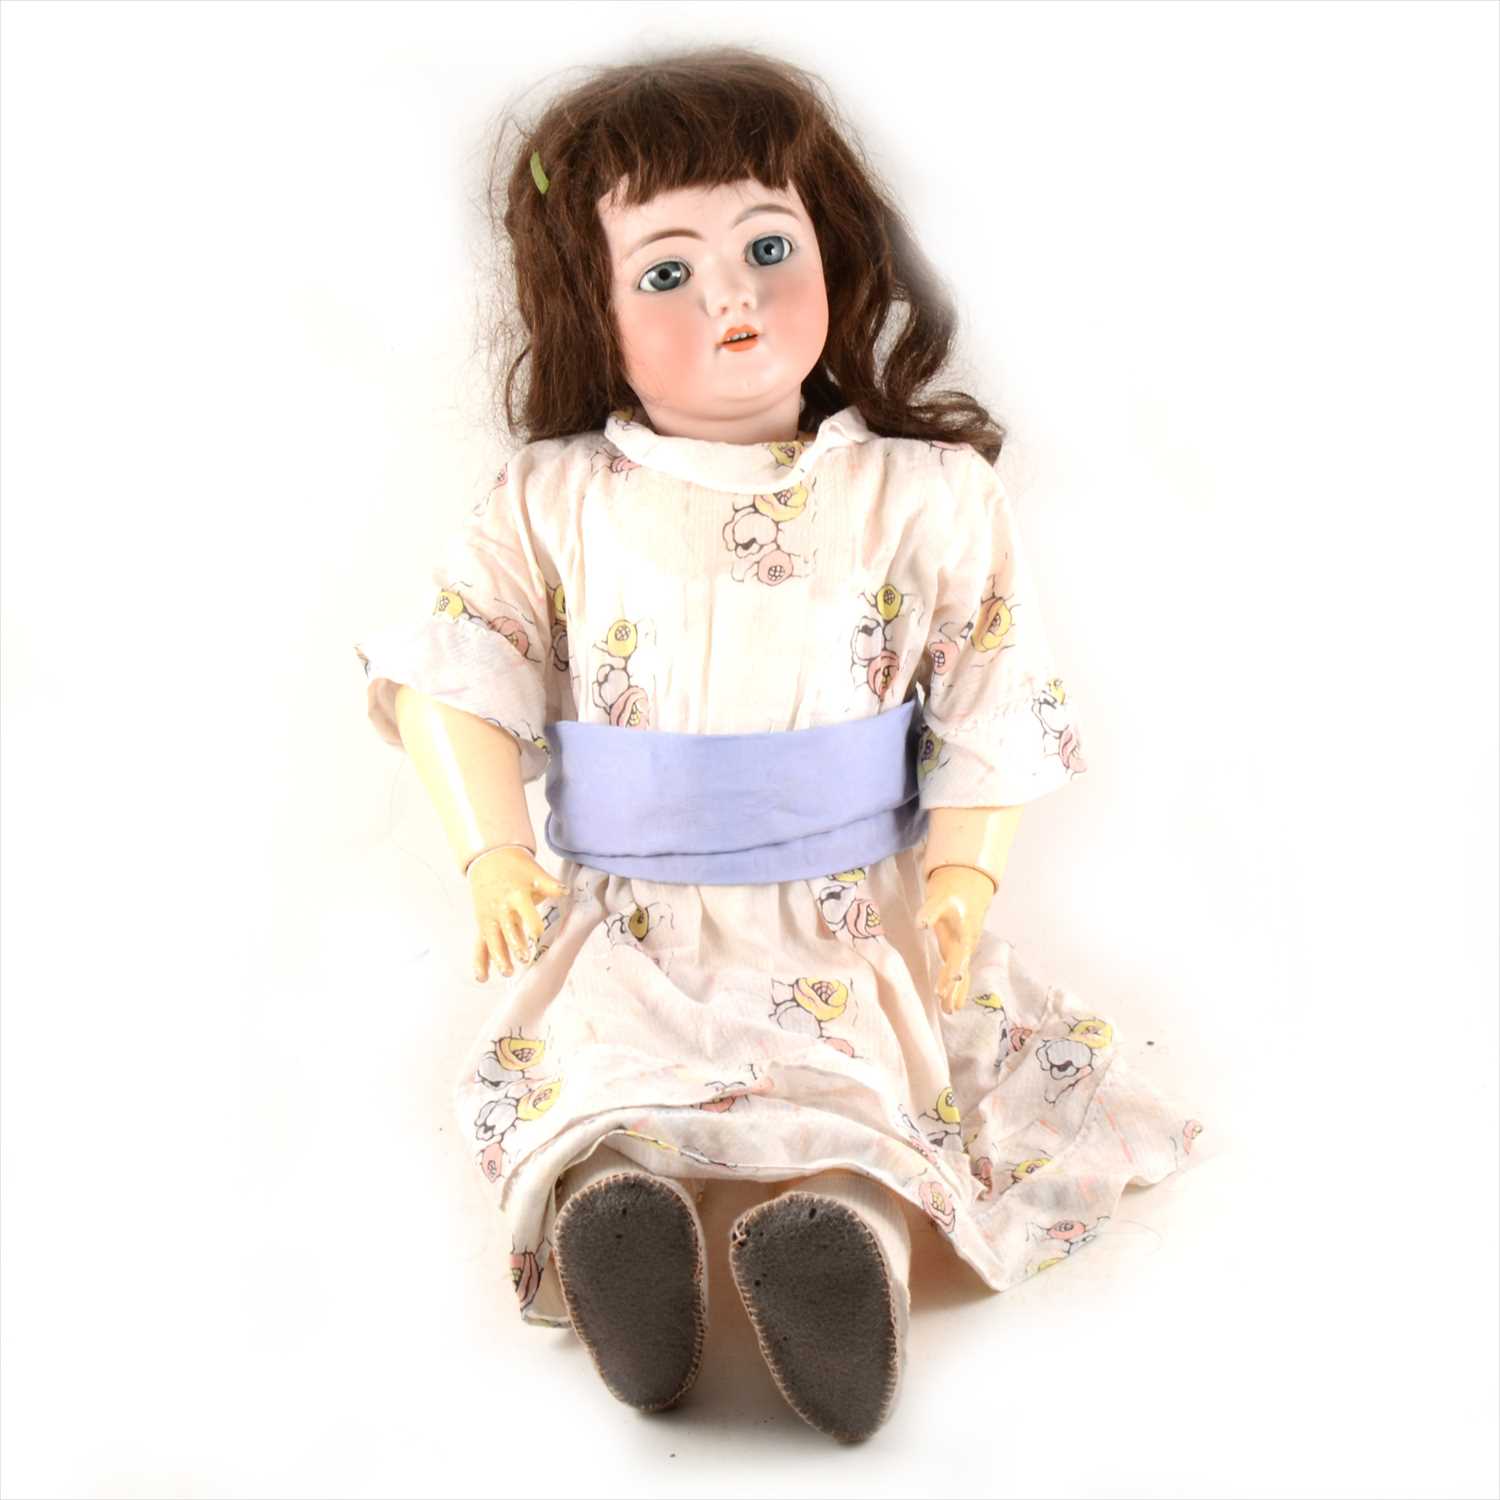 Lot 128 - S&C Schutzmeister & Quendt bisque head doll, with sleepy eyes, open mouth, composition body, 70cm.